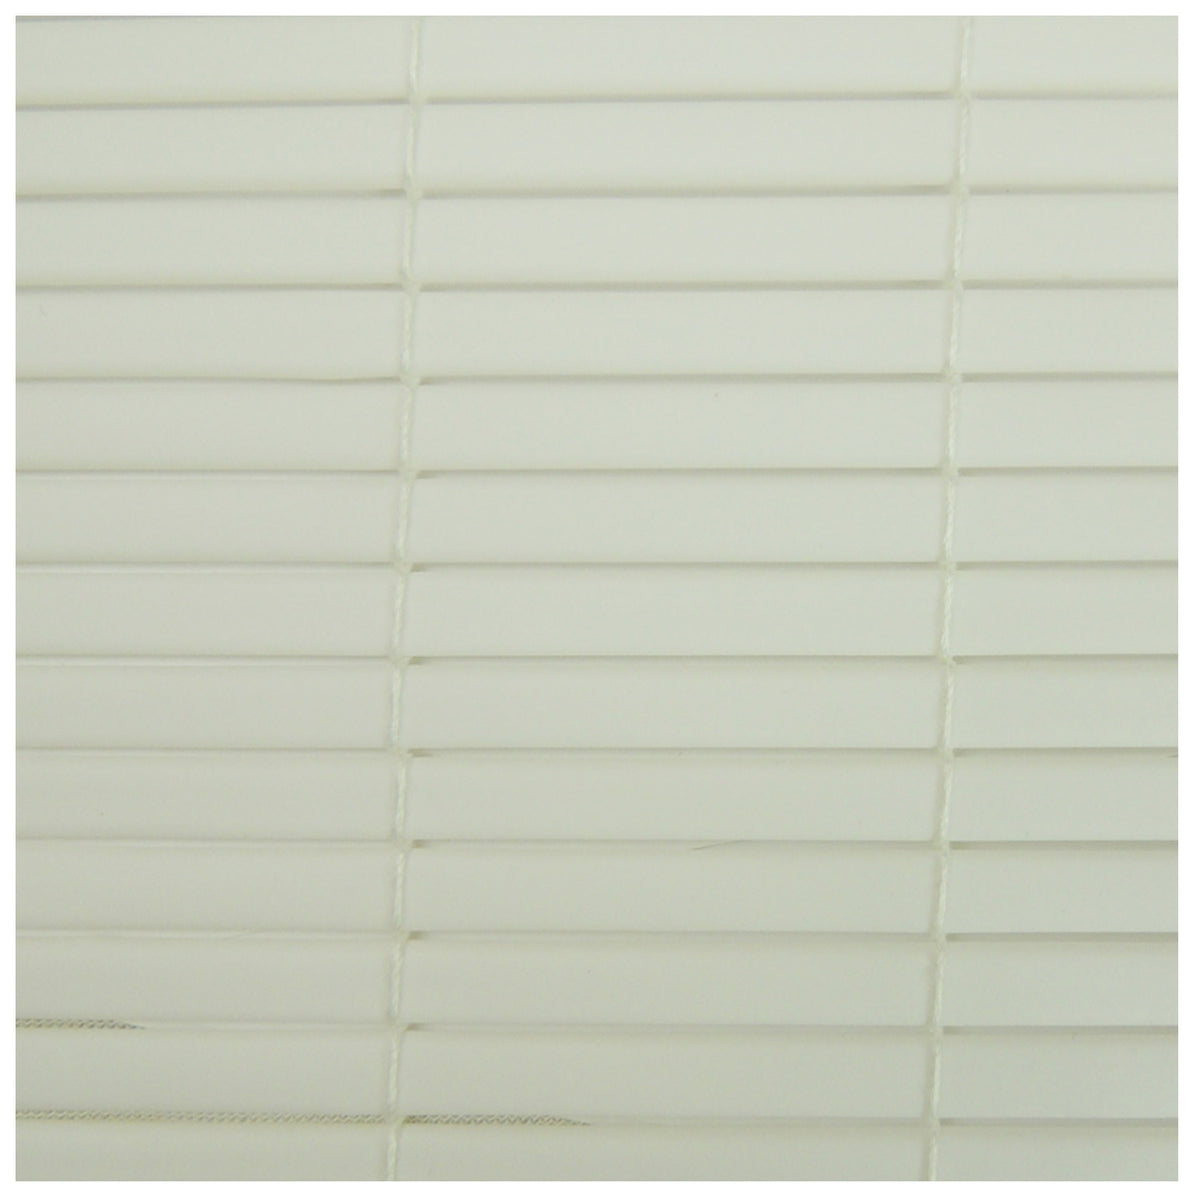 Radiance 3320136 Rollup Shade, 36" x 72"